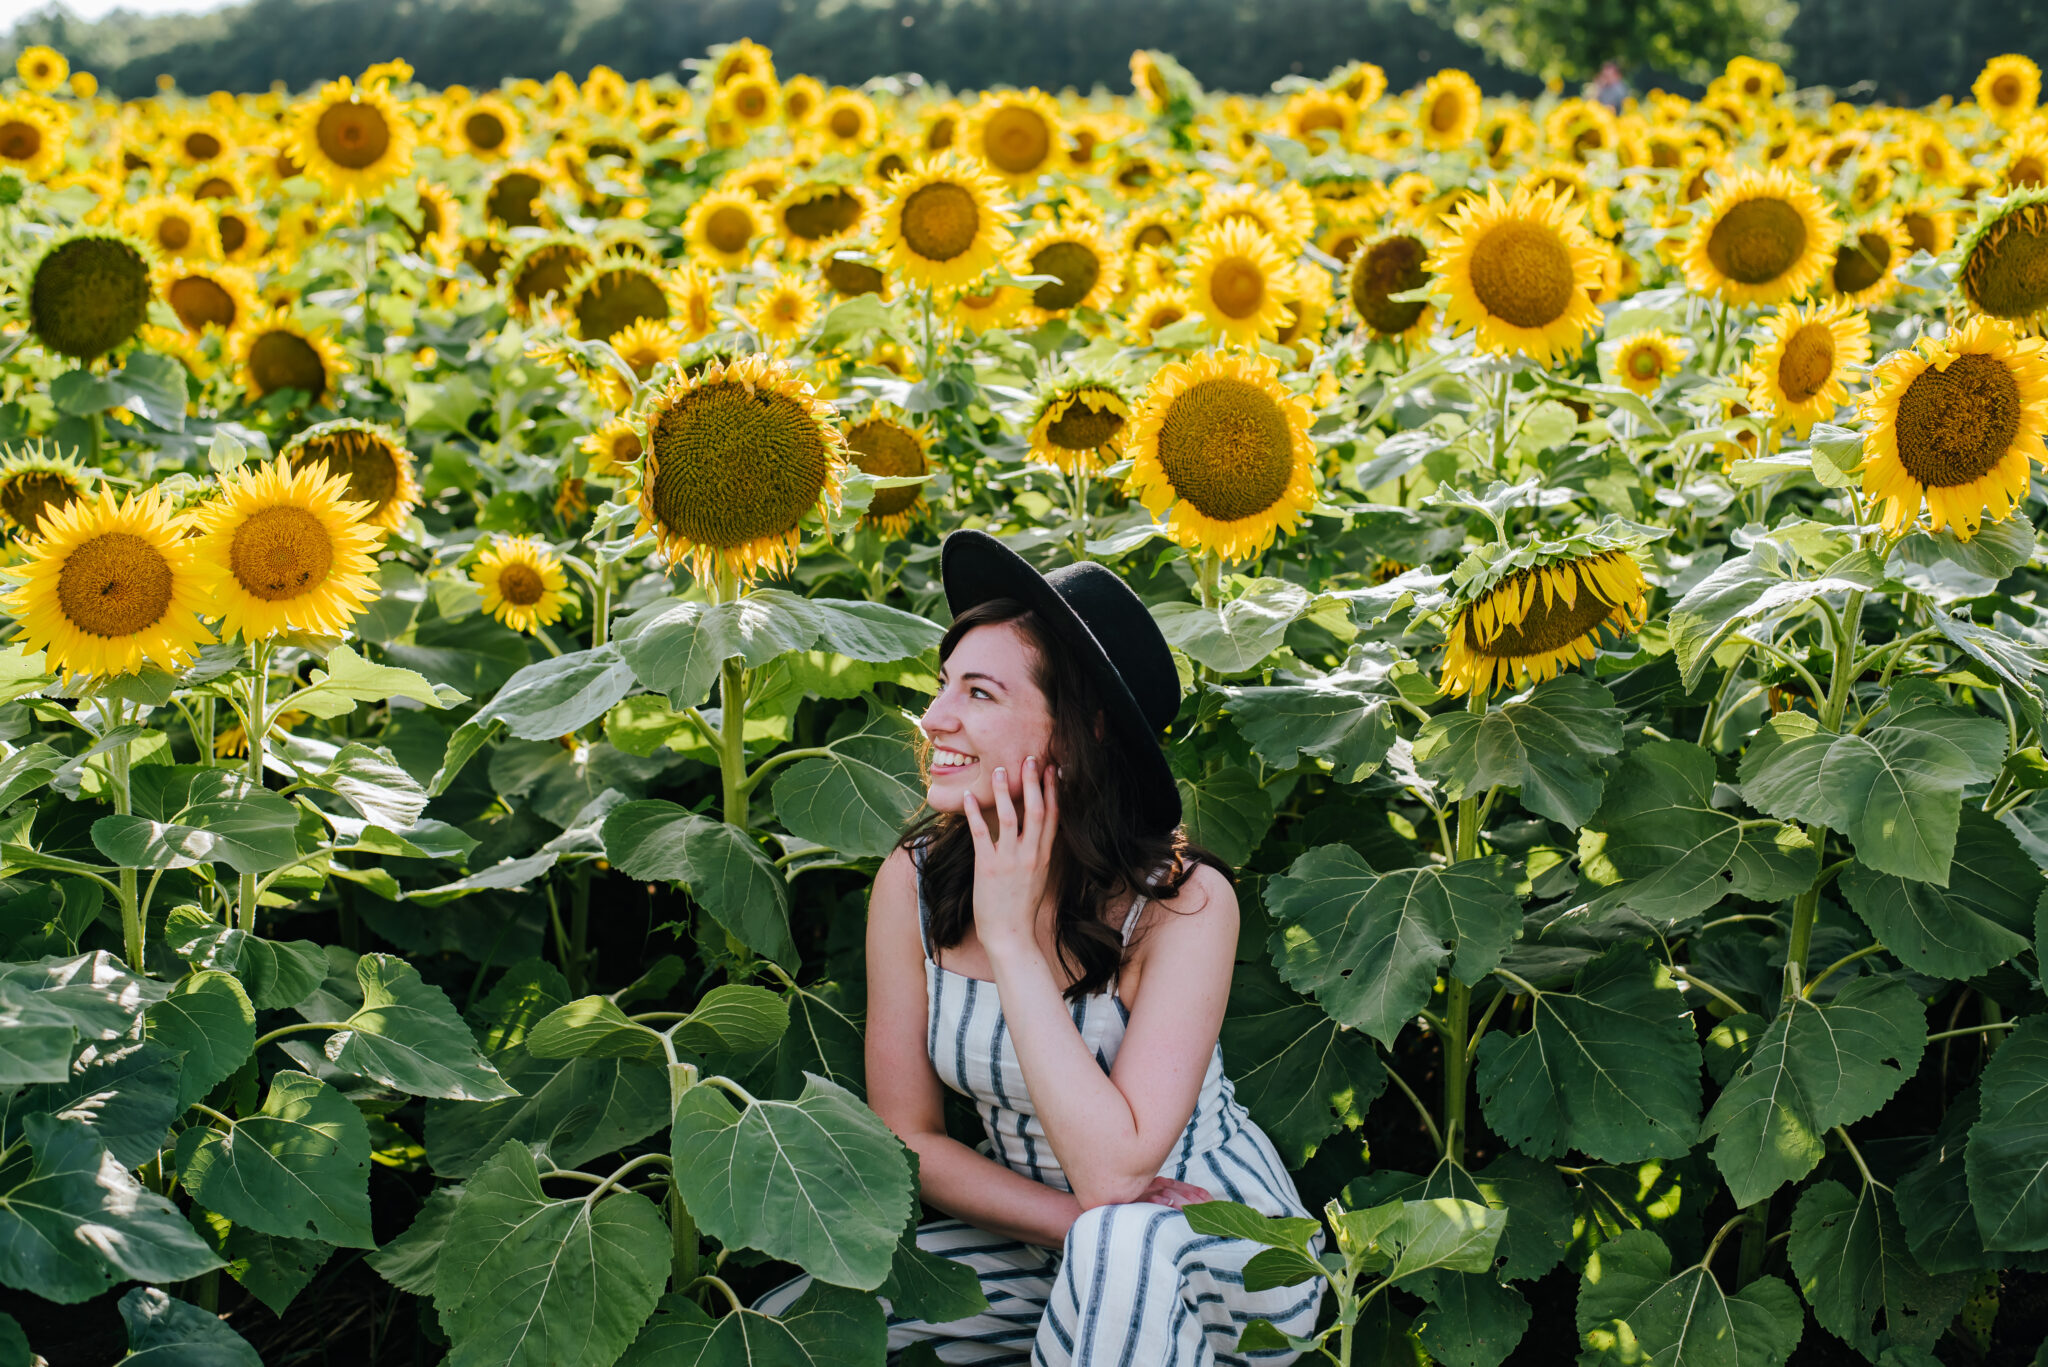 Girl with wide brimmed hat poses in field of sunflowers